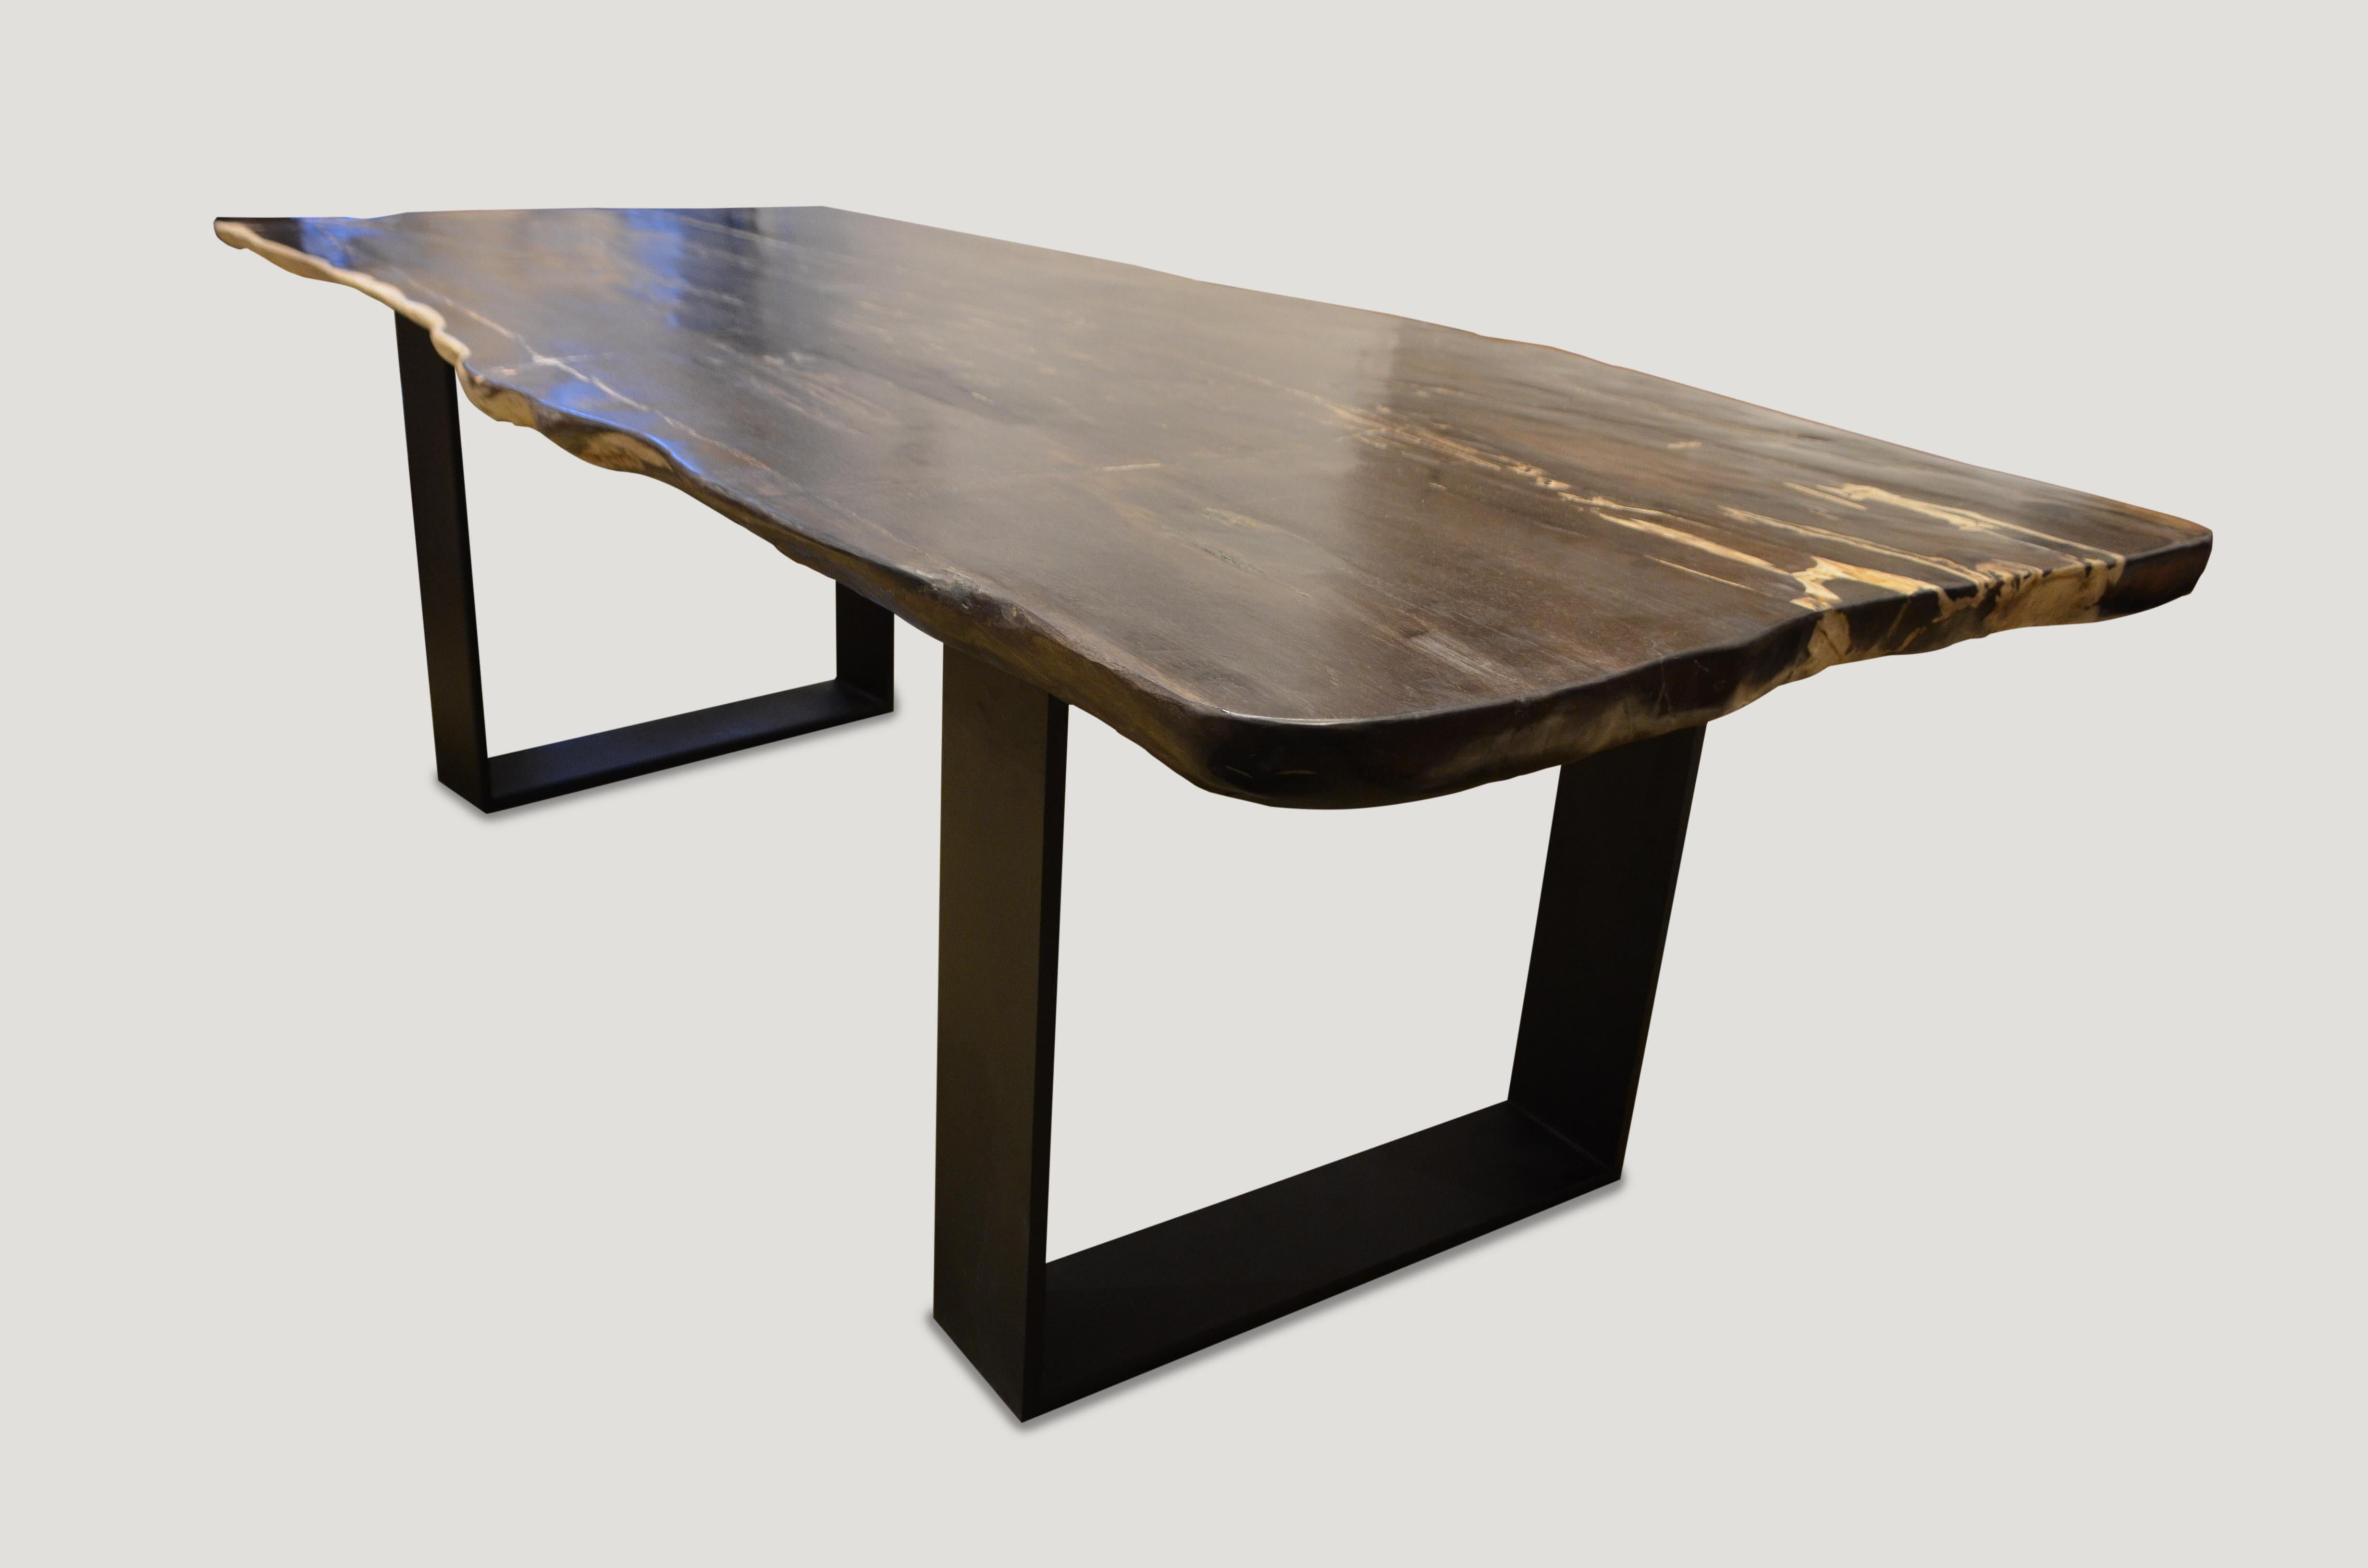 High quality petrified wood live edge dining table, coffee table or counter top. This two inch thick slab is shown with a black solid steel base which we can also switch out for two espresso stained wooden bases, coffee table height, if preferred.